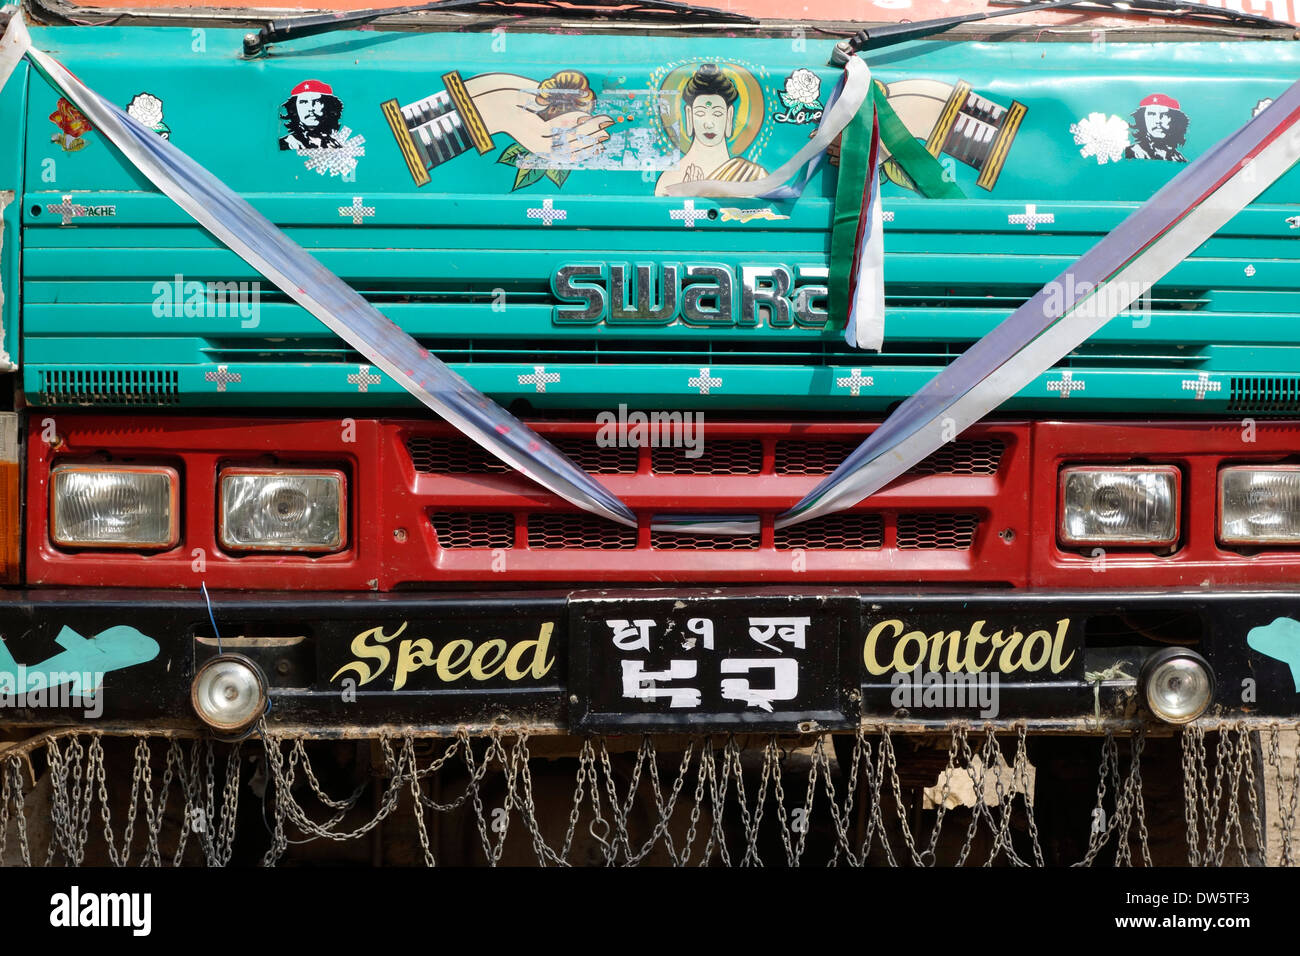 Decorated bus in the Gorkha region of Nepal. Stock Photo